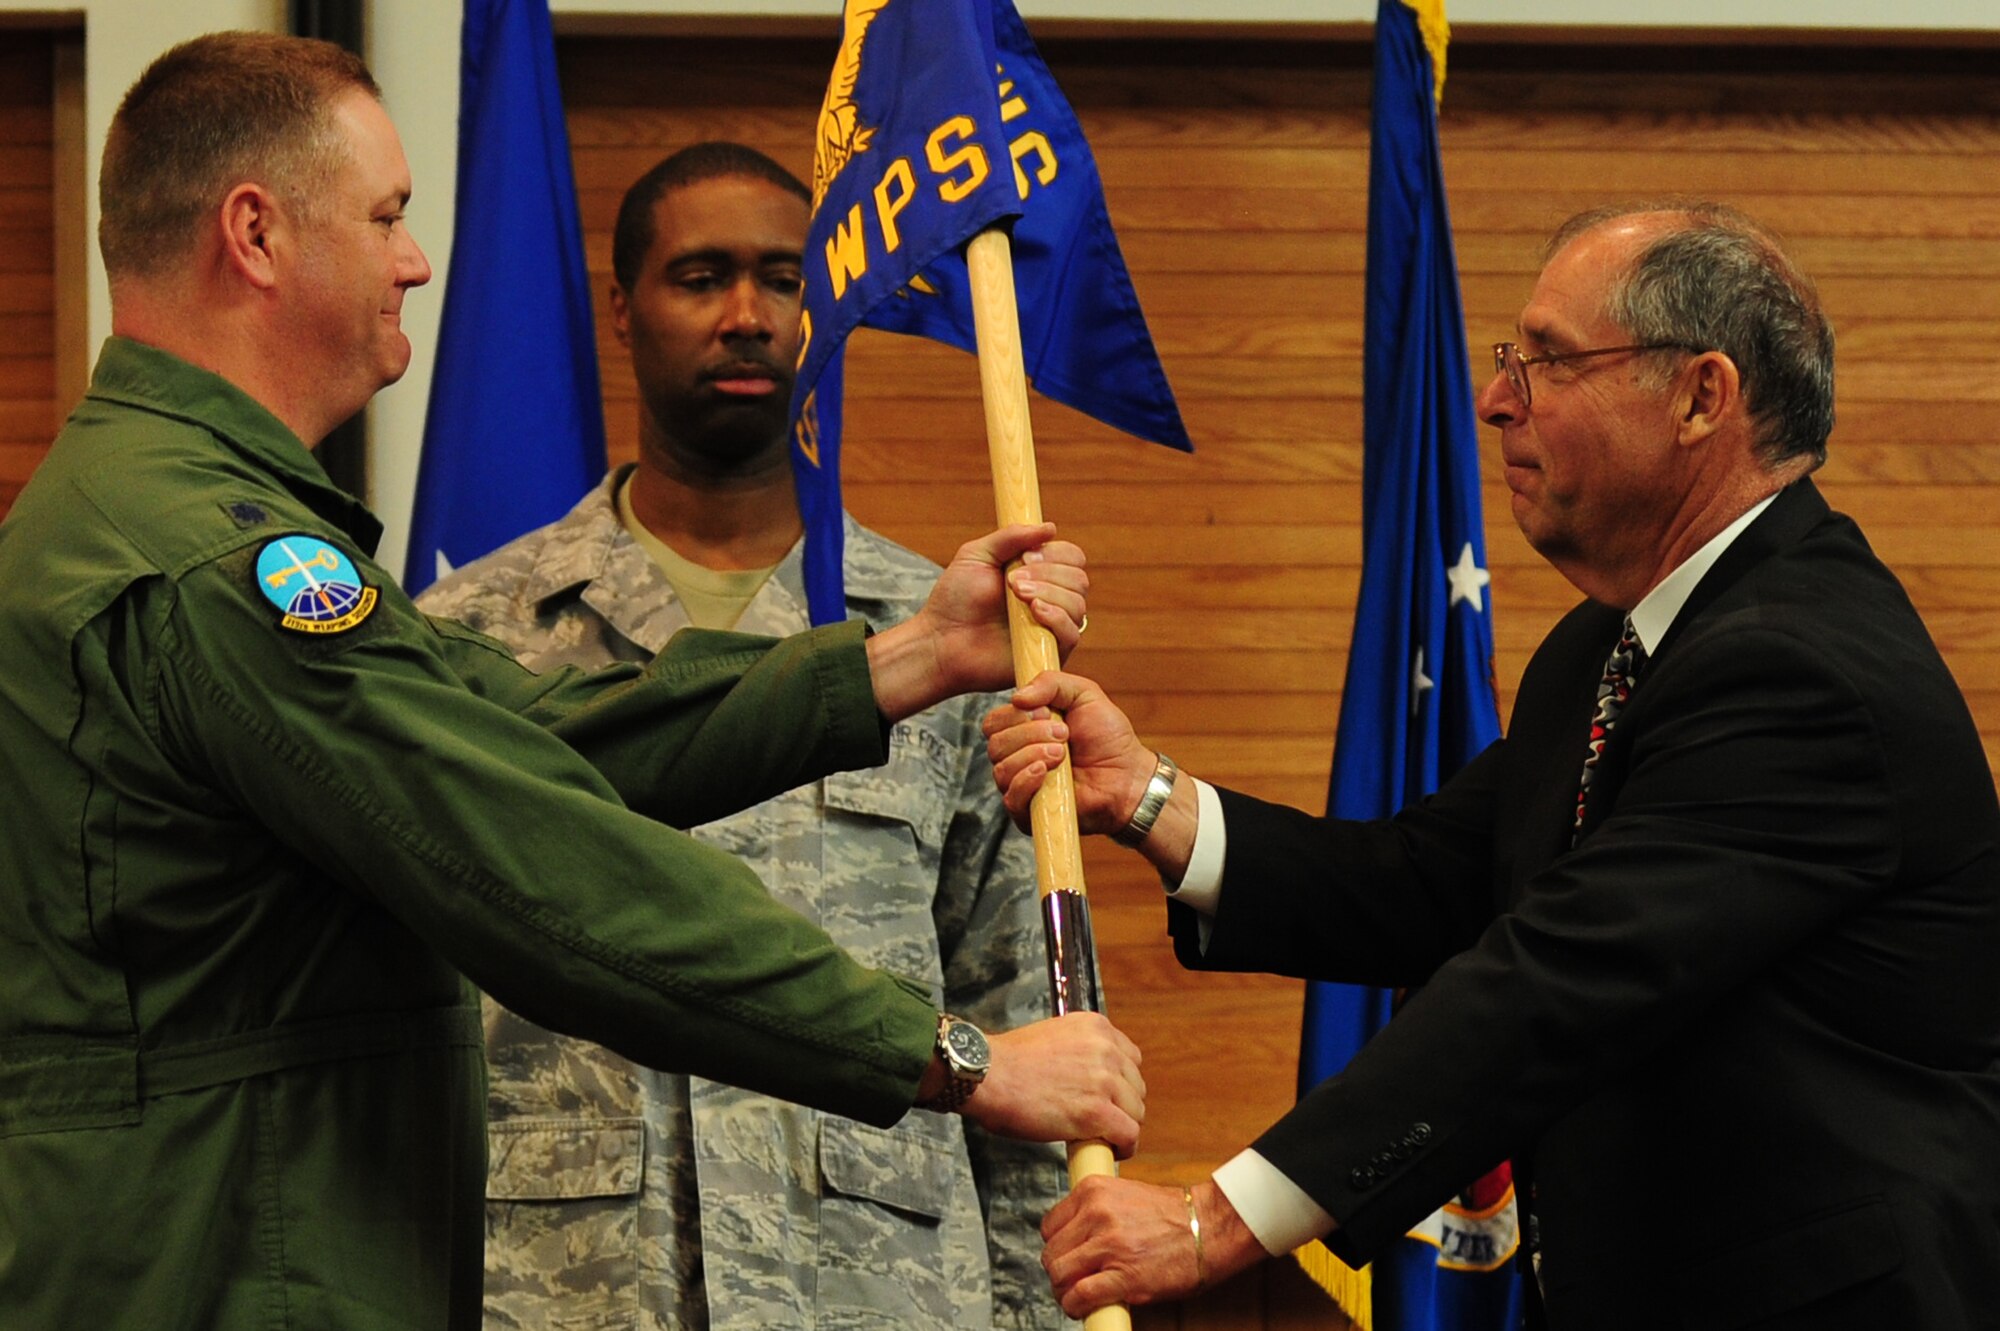 U.S. Air Force Lt. Col. Jason Seyer, 315th Weapons Squadron commander, passes the guidon to Dennis Soukup, department chair of Applied Technologies at the College of Southern Nevada, during a commander's call at Nellis Air Force Base, March 9, 2012.  A total of eleven new honorary commanders assumed command during the induction.  (U.S. Air Force photo by Staff Sgt. William P.Coleman)